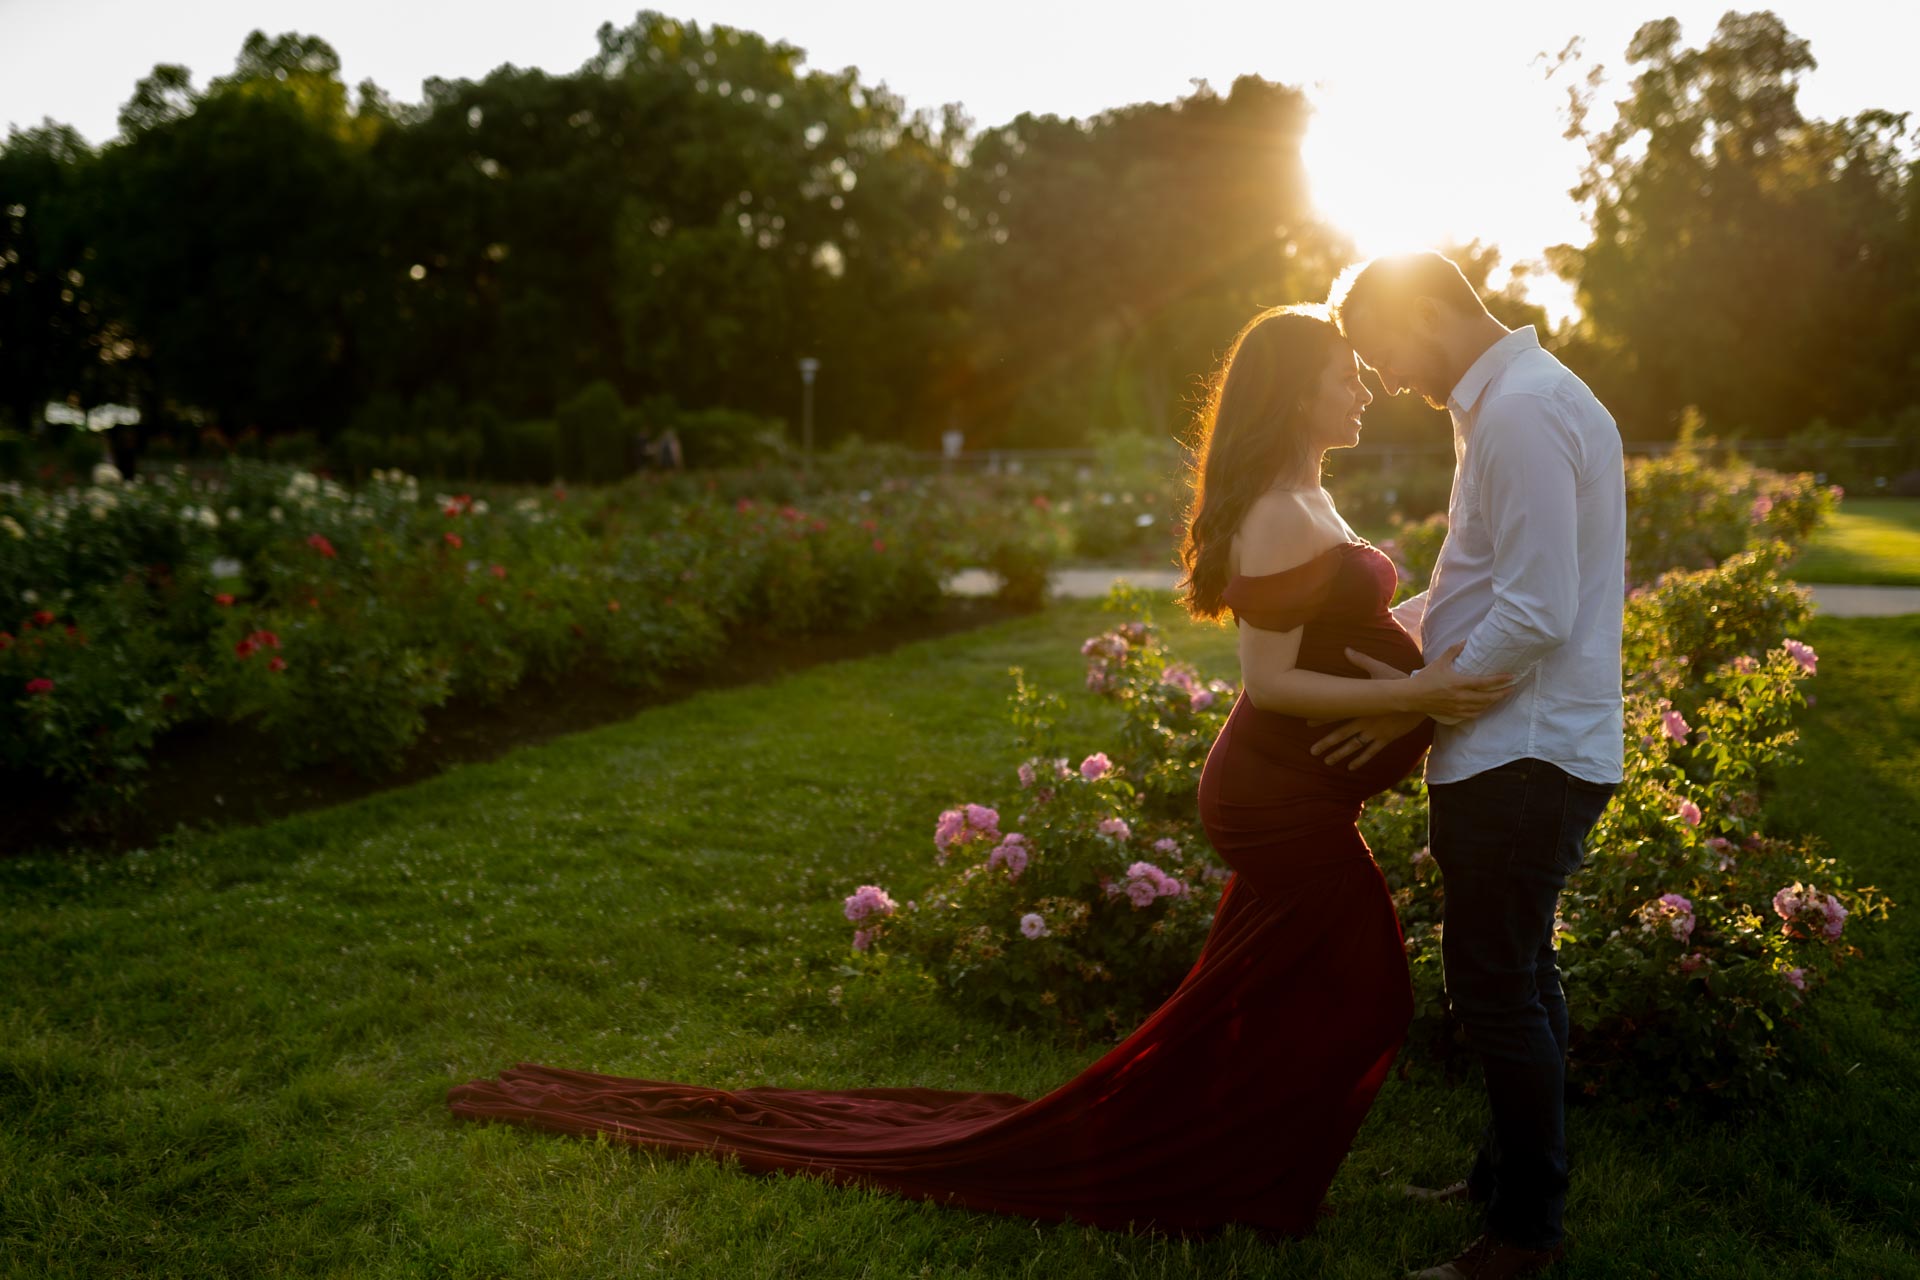 father-to-be holding his partner's belly. She's wearing an elegant red dress and the sun is setting behind them